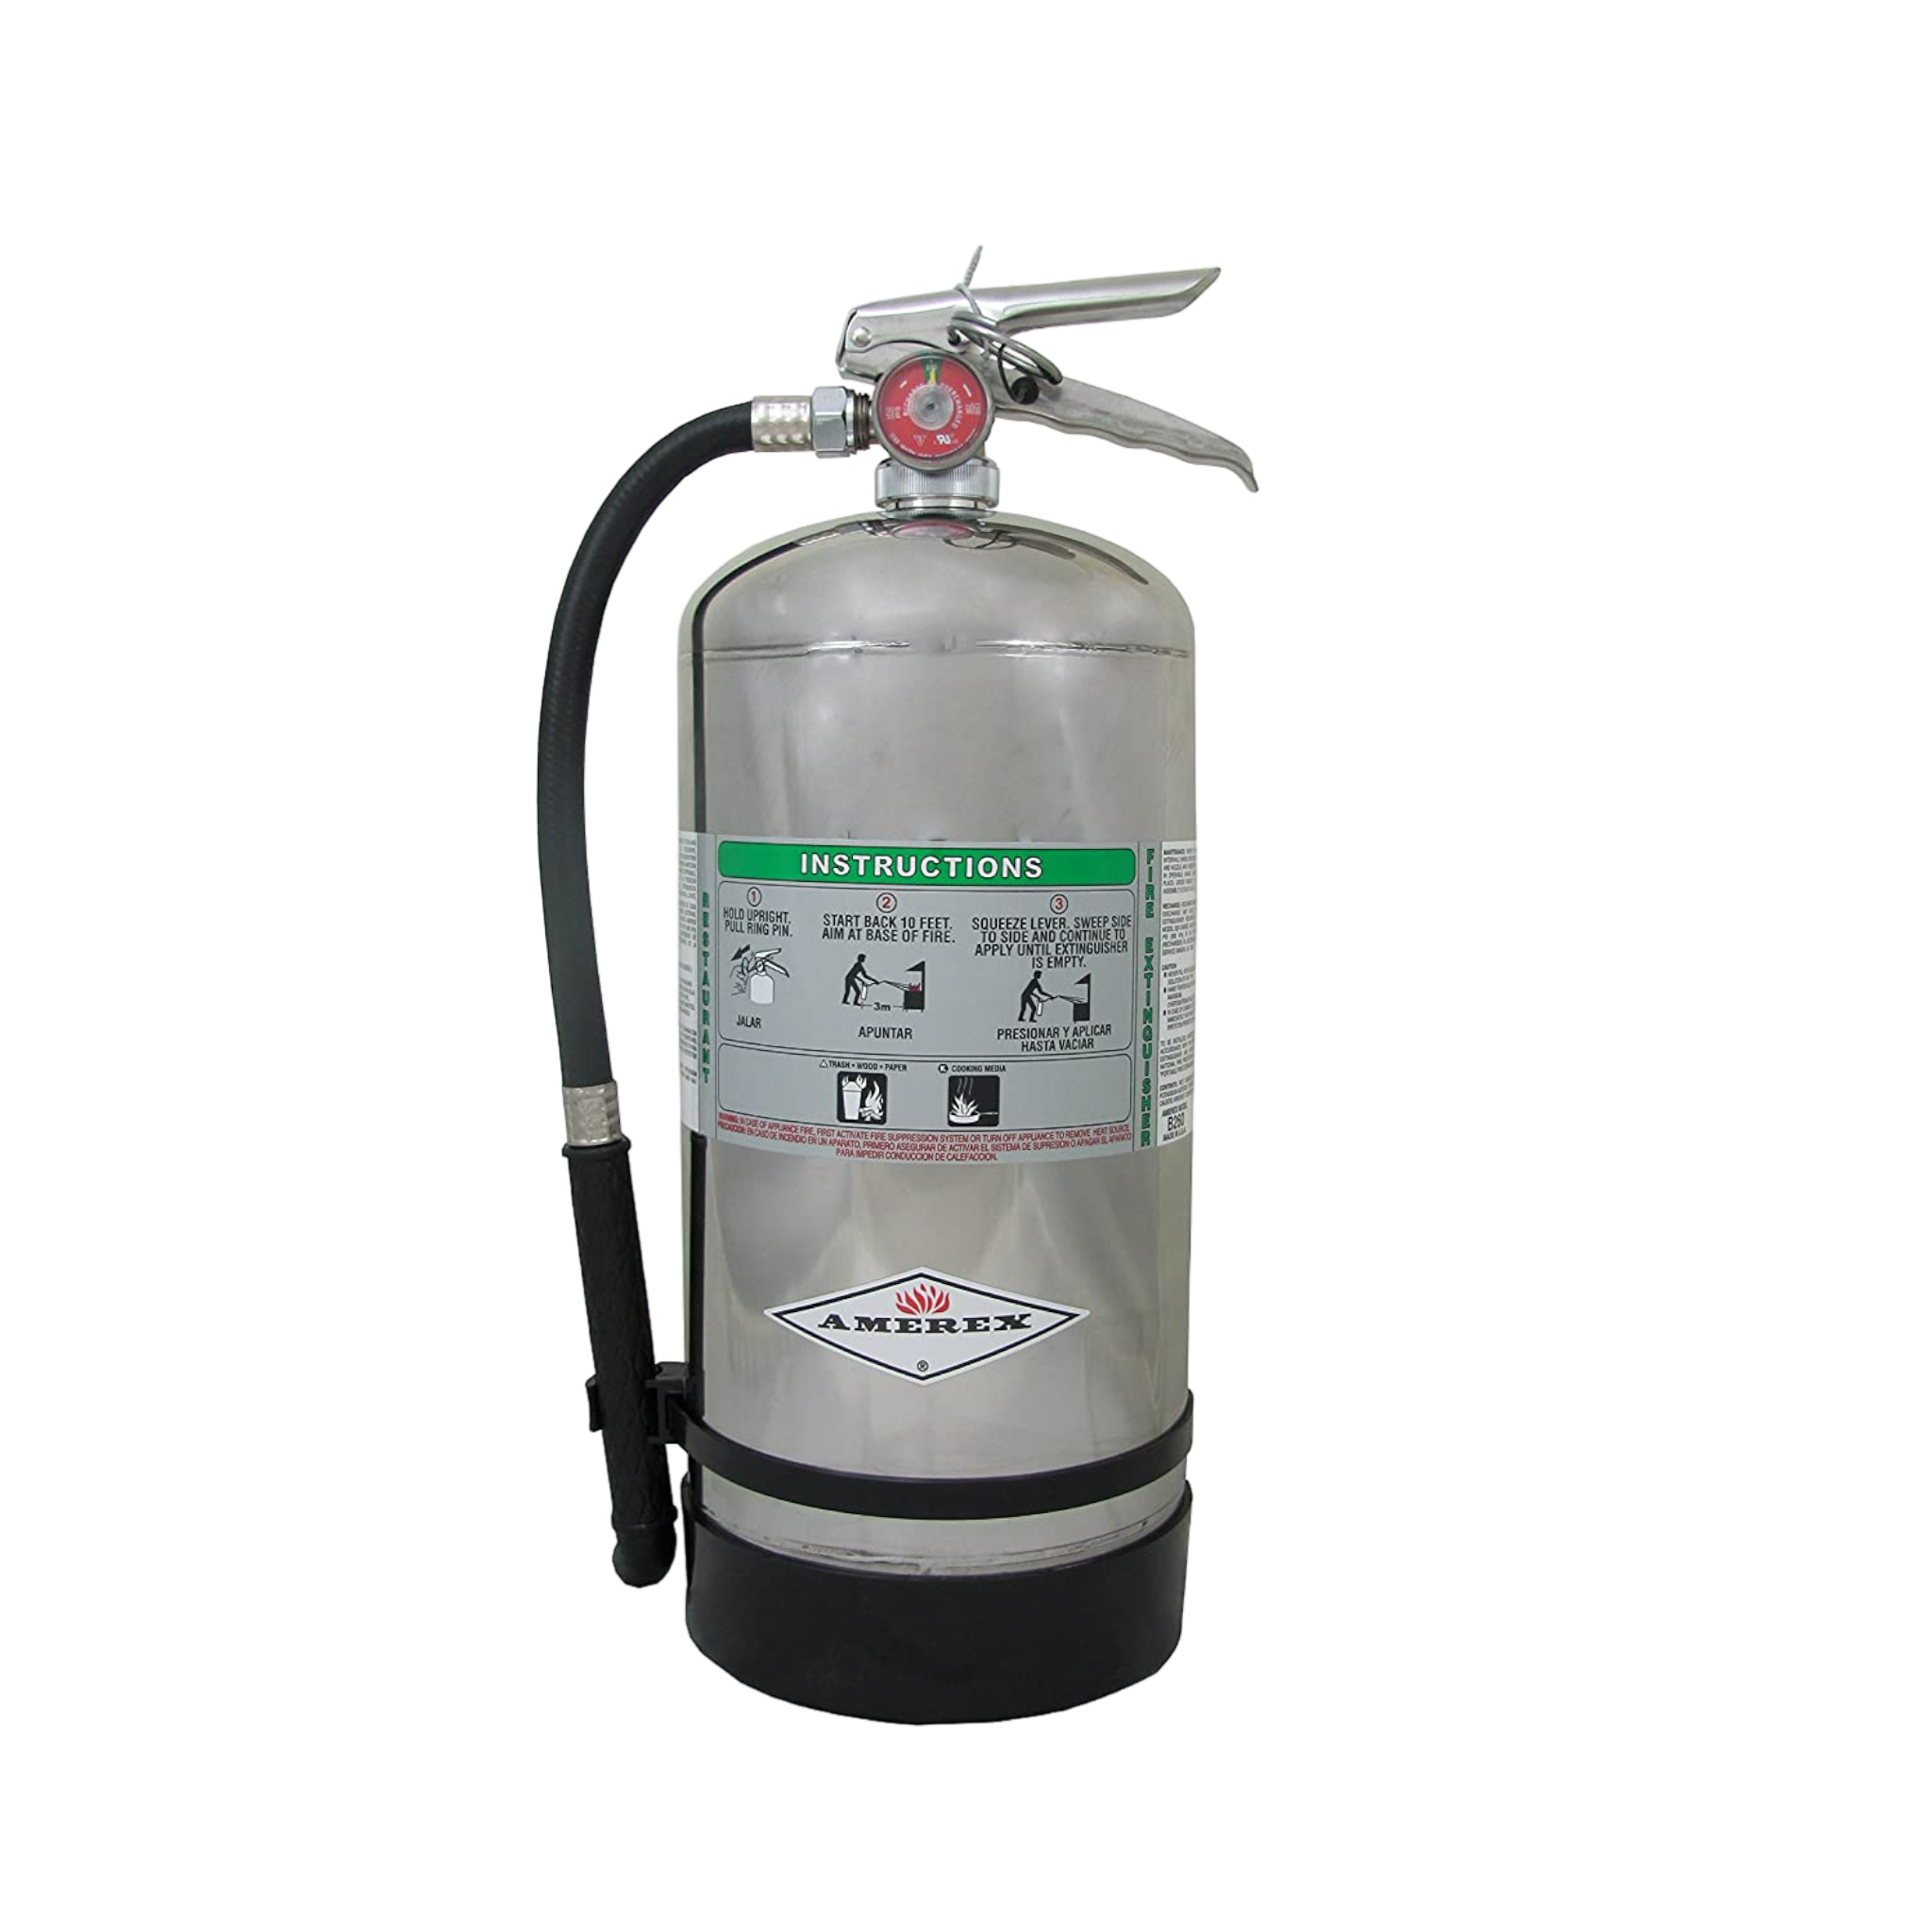 Amerex B260, 6 Liter Wet Chemical Class A K Fire Extinguisher - Pro-Distributing